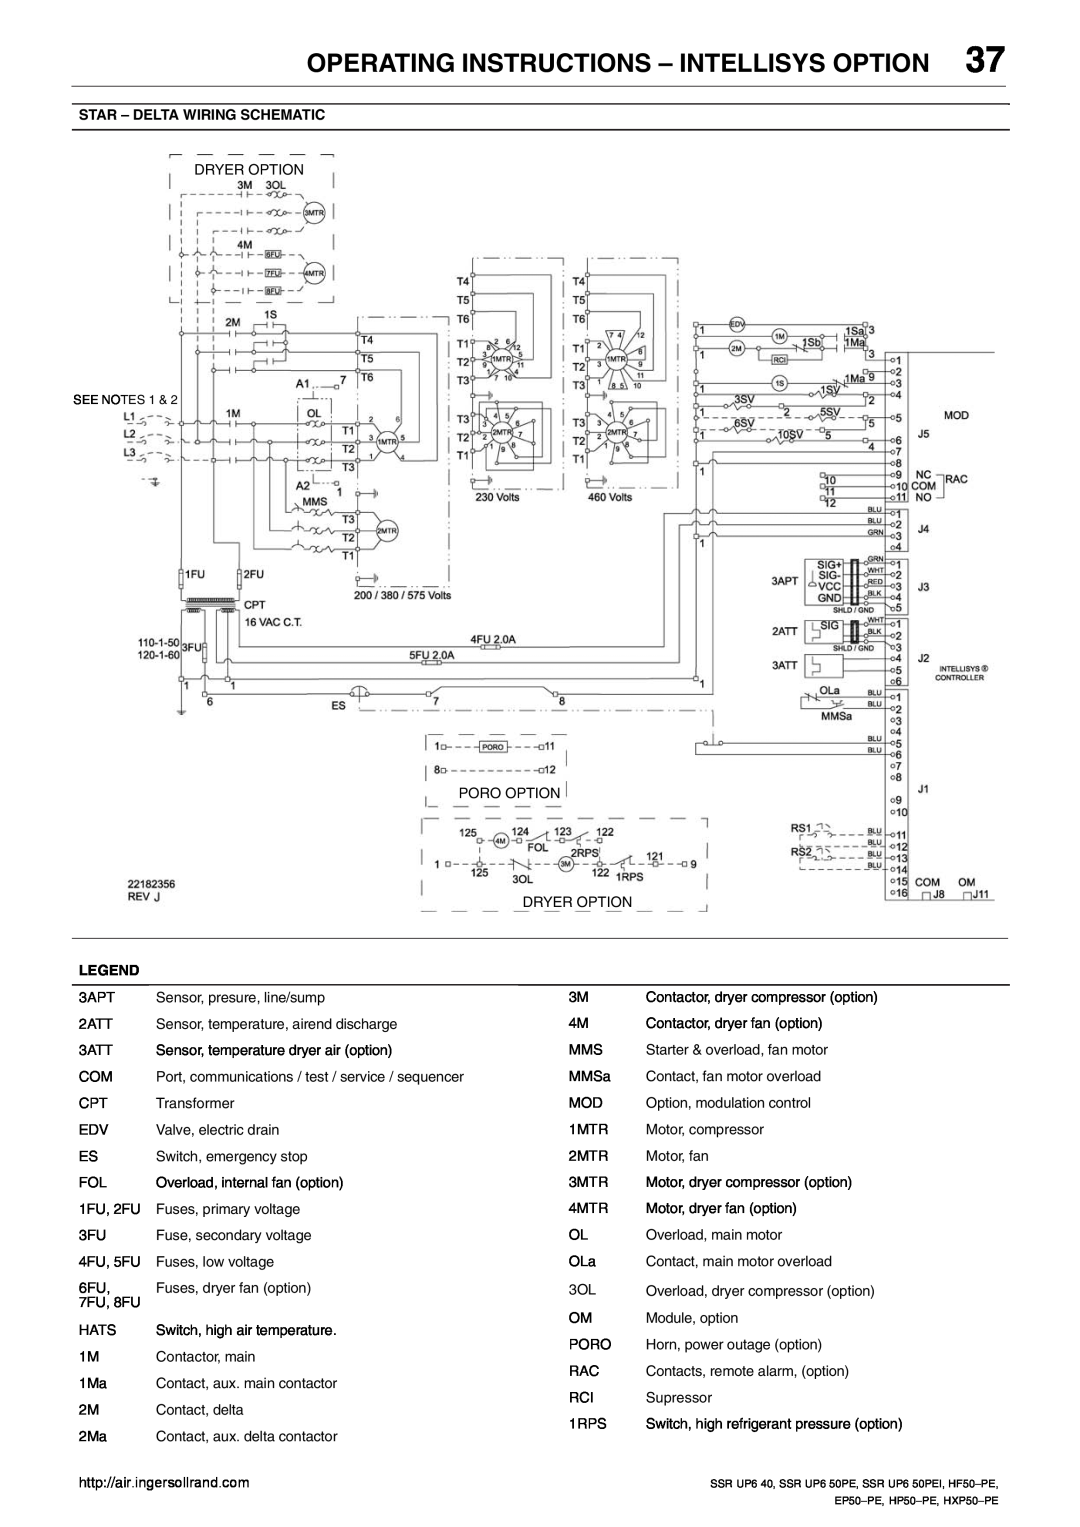 Ingersoll-Rand EP50-PE, SSR UP6 40, SSR UP6 50PE Operating Instructions - Intellisys Option, Star - Delta Wiring Schematic 